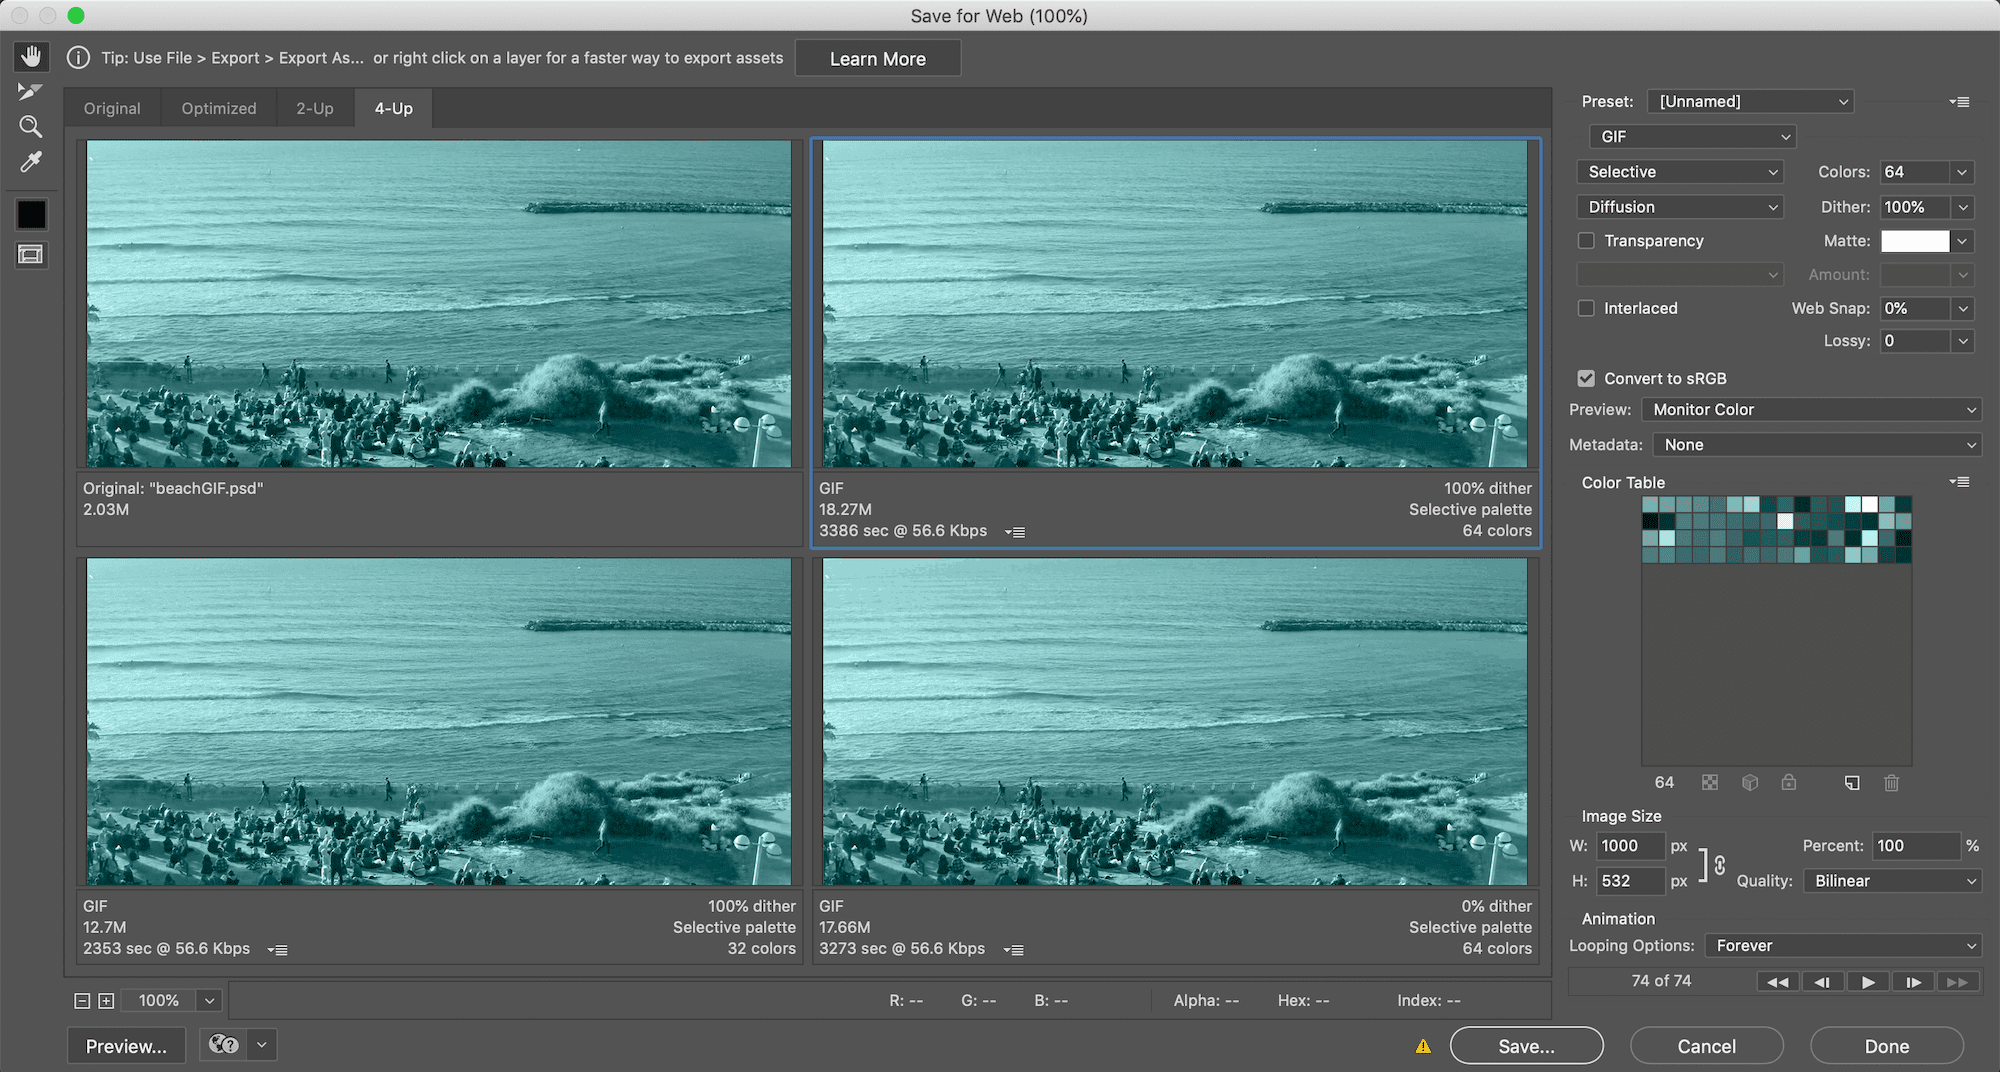 How to export a GIF from Adobe Photoshop - imagy